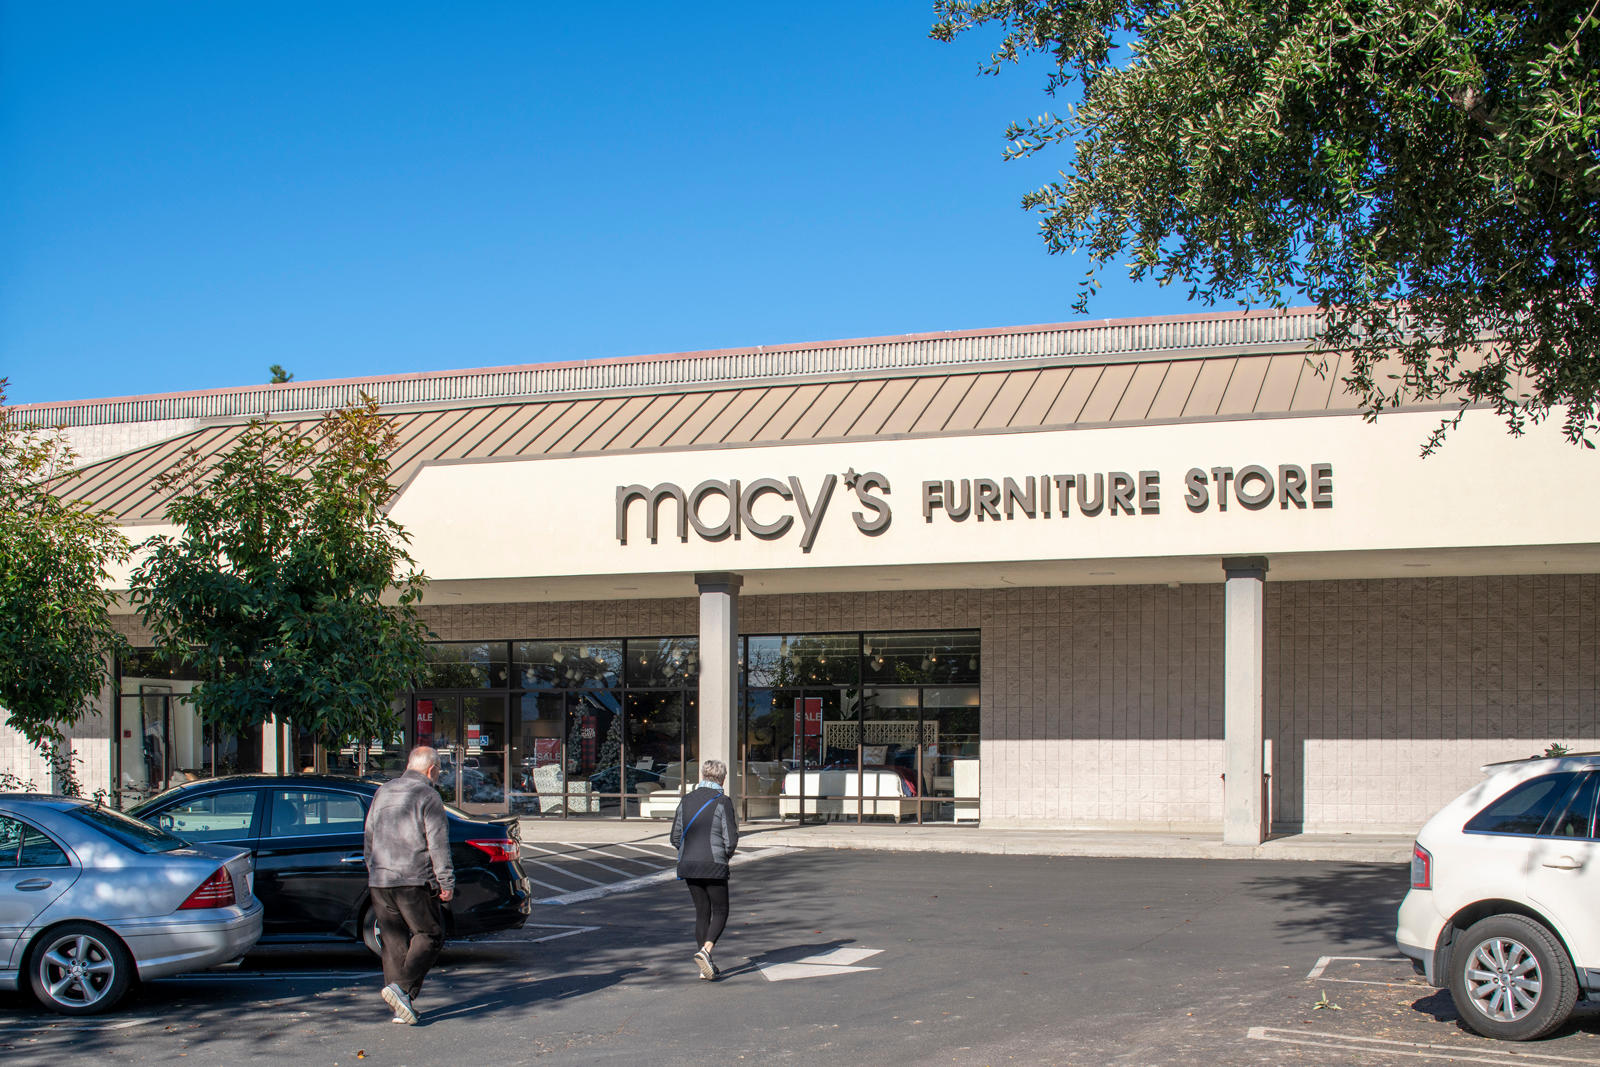 Macy's Furniture Store at Rose Pavilion Shopping Center